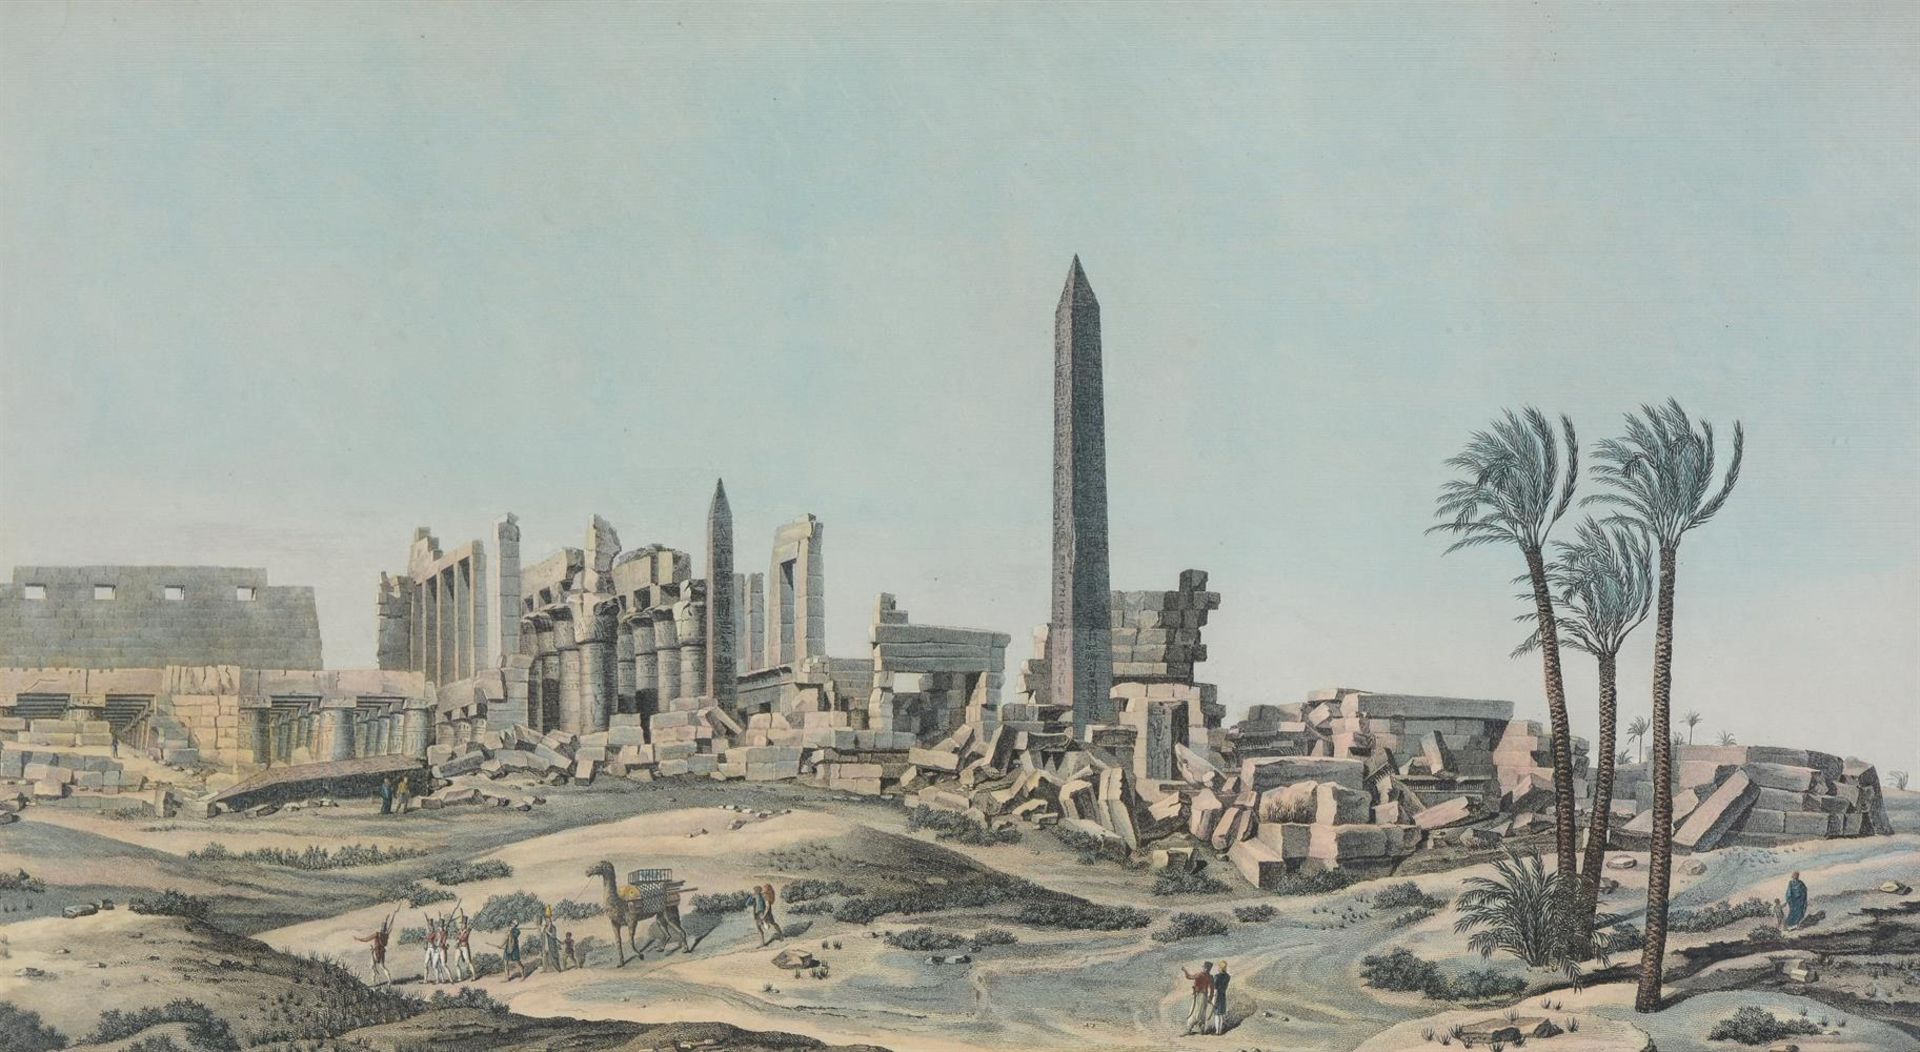 SIX HAND-COLOURED ENGRAVINGS OF EGYPT (LUXOR, KARNAK, DENDERA), EARLY 19TH CENTURY - Image 11 of 13